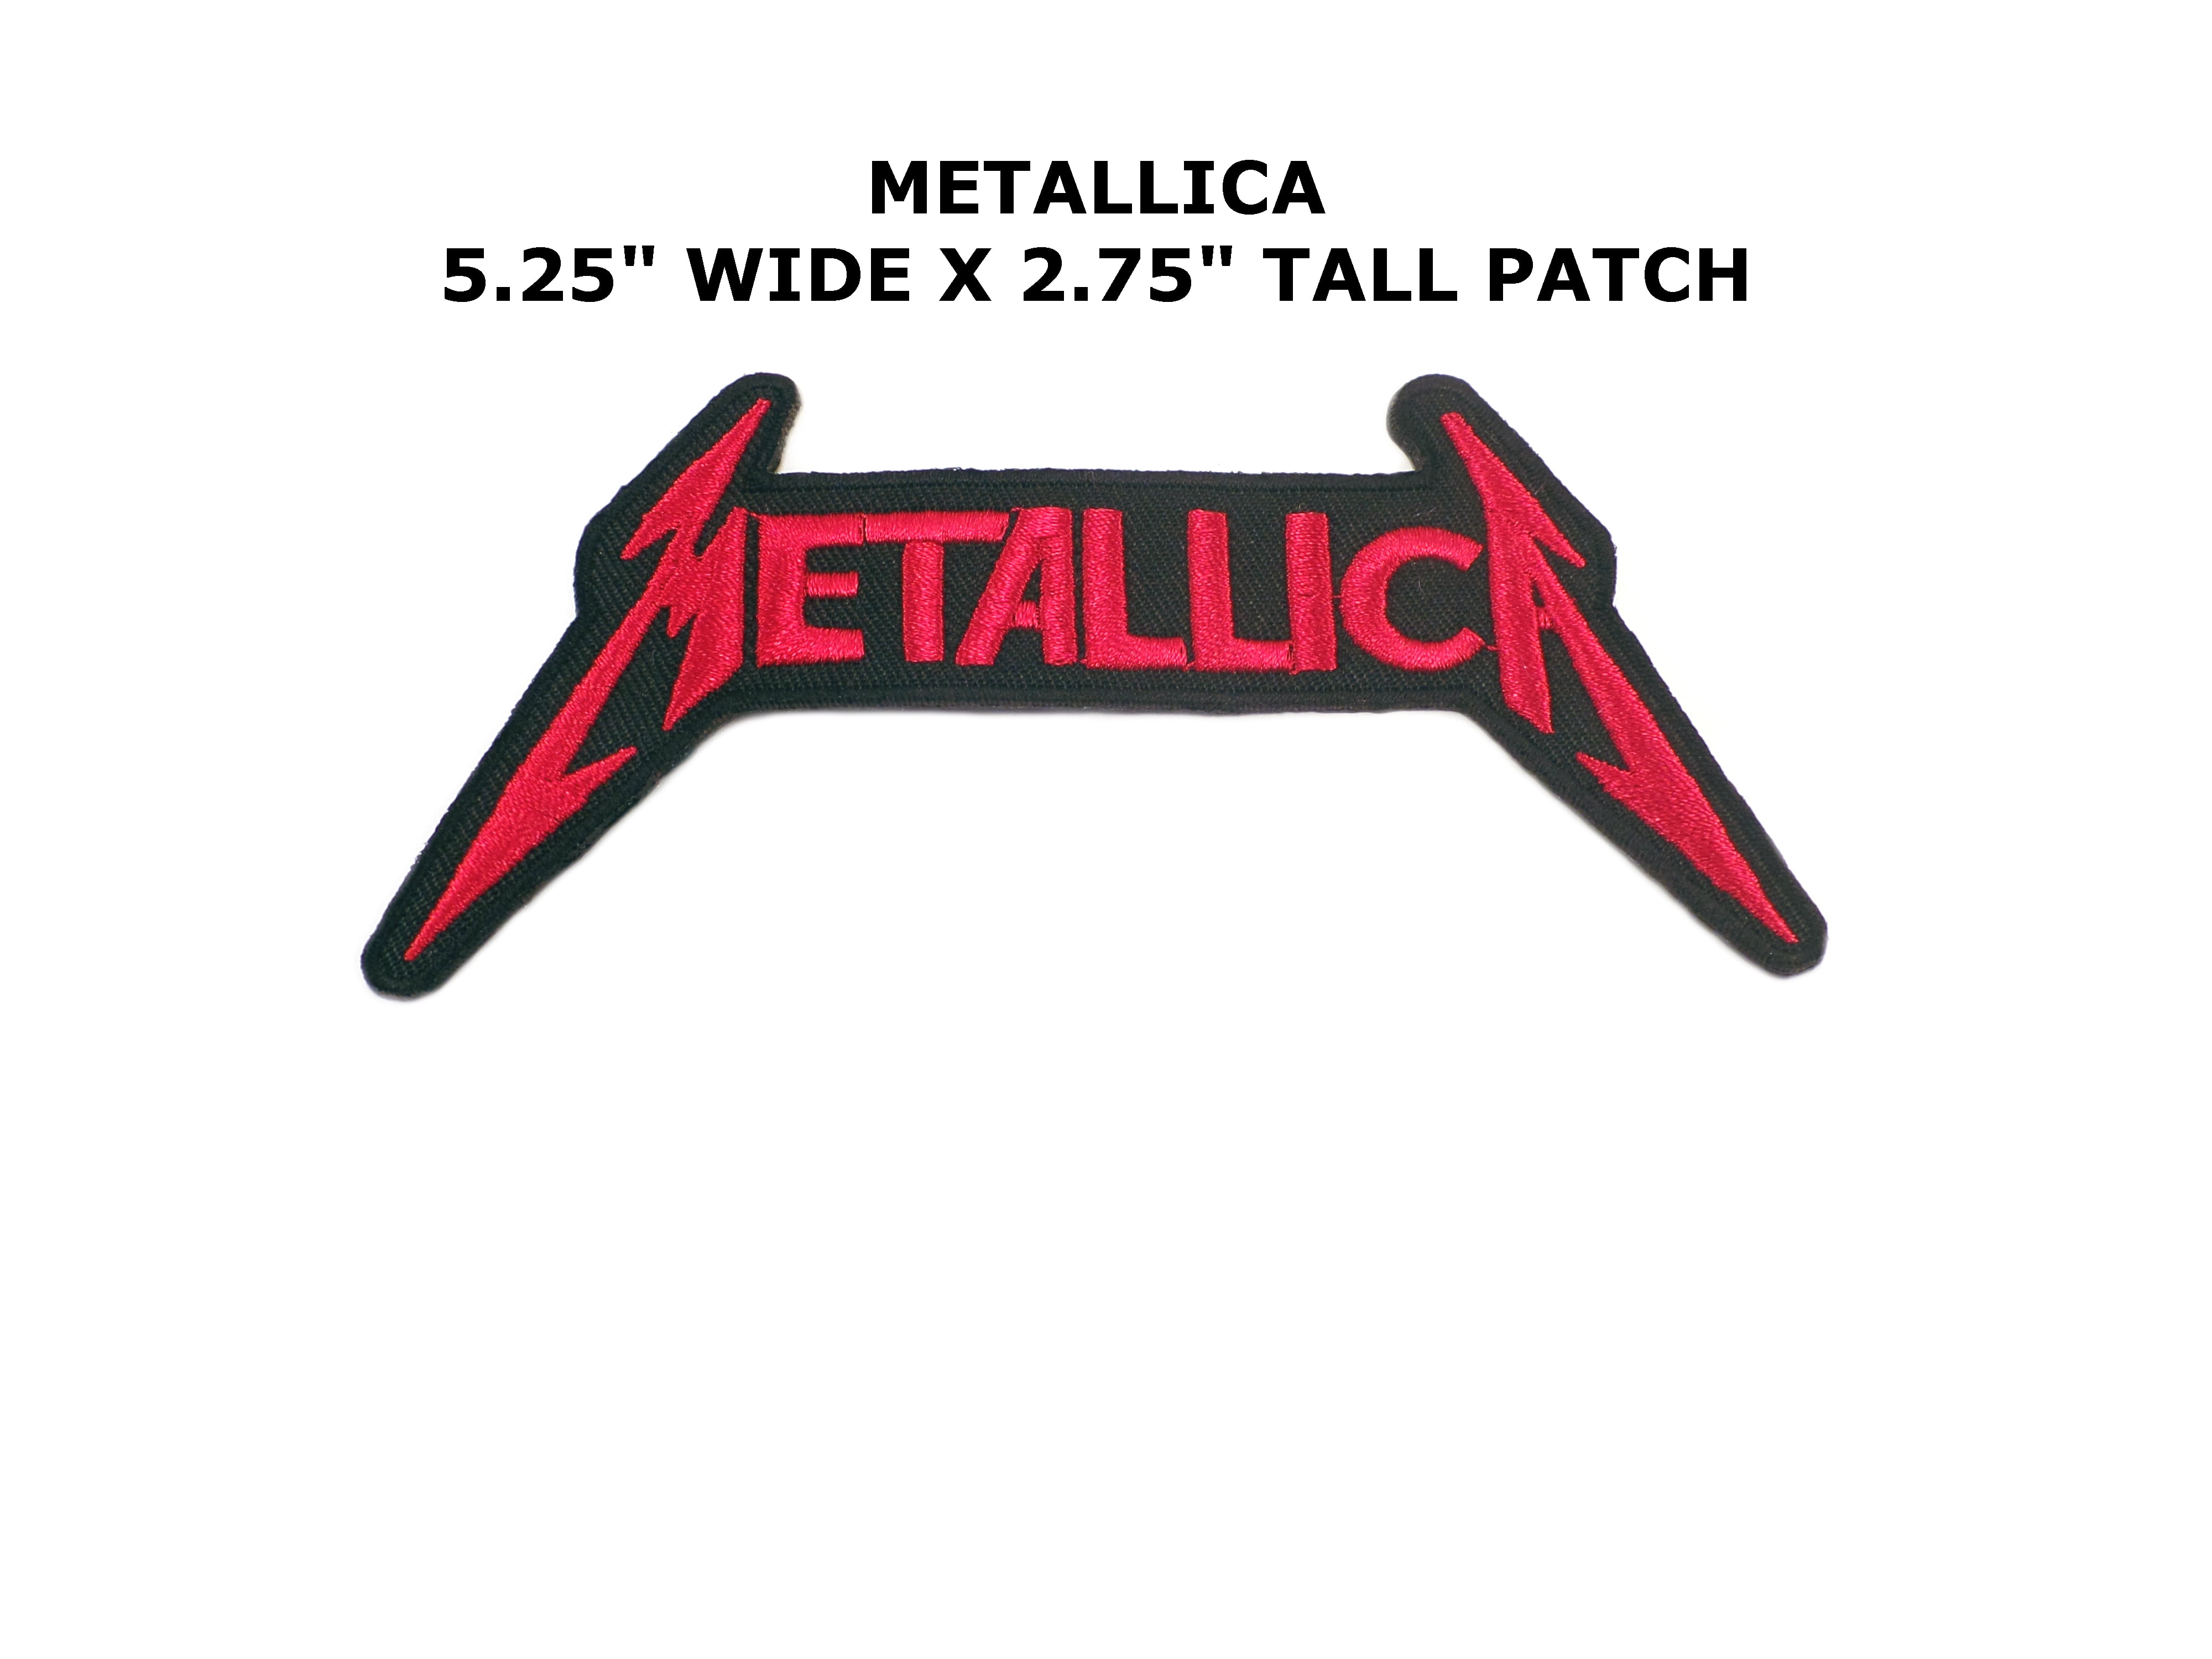 Metallica Music Band Embroidered Iron On Sew On Patch Badge For Clothes Bags Etc 